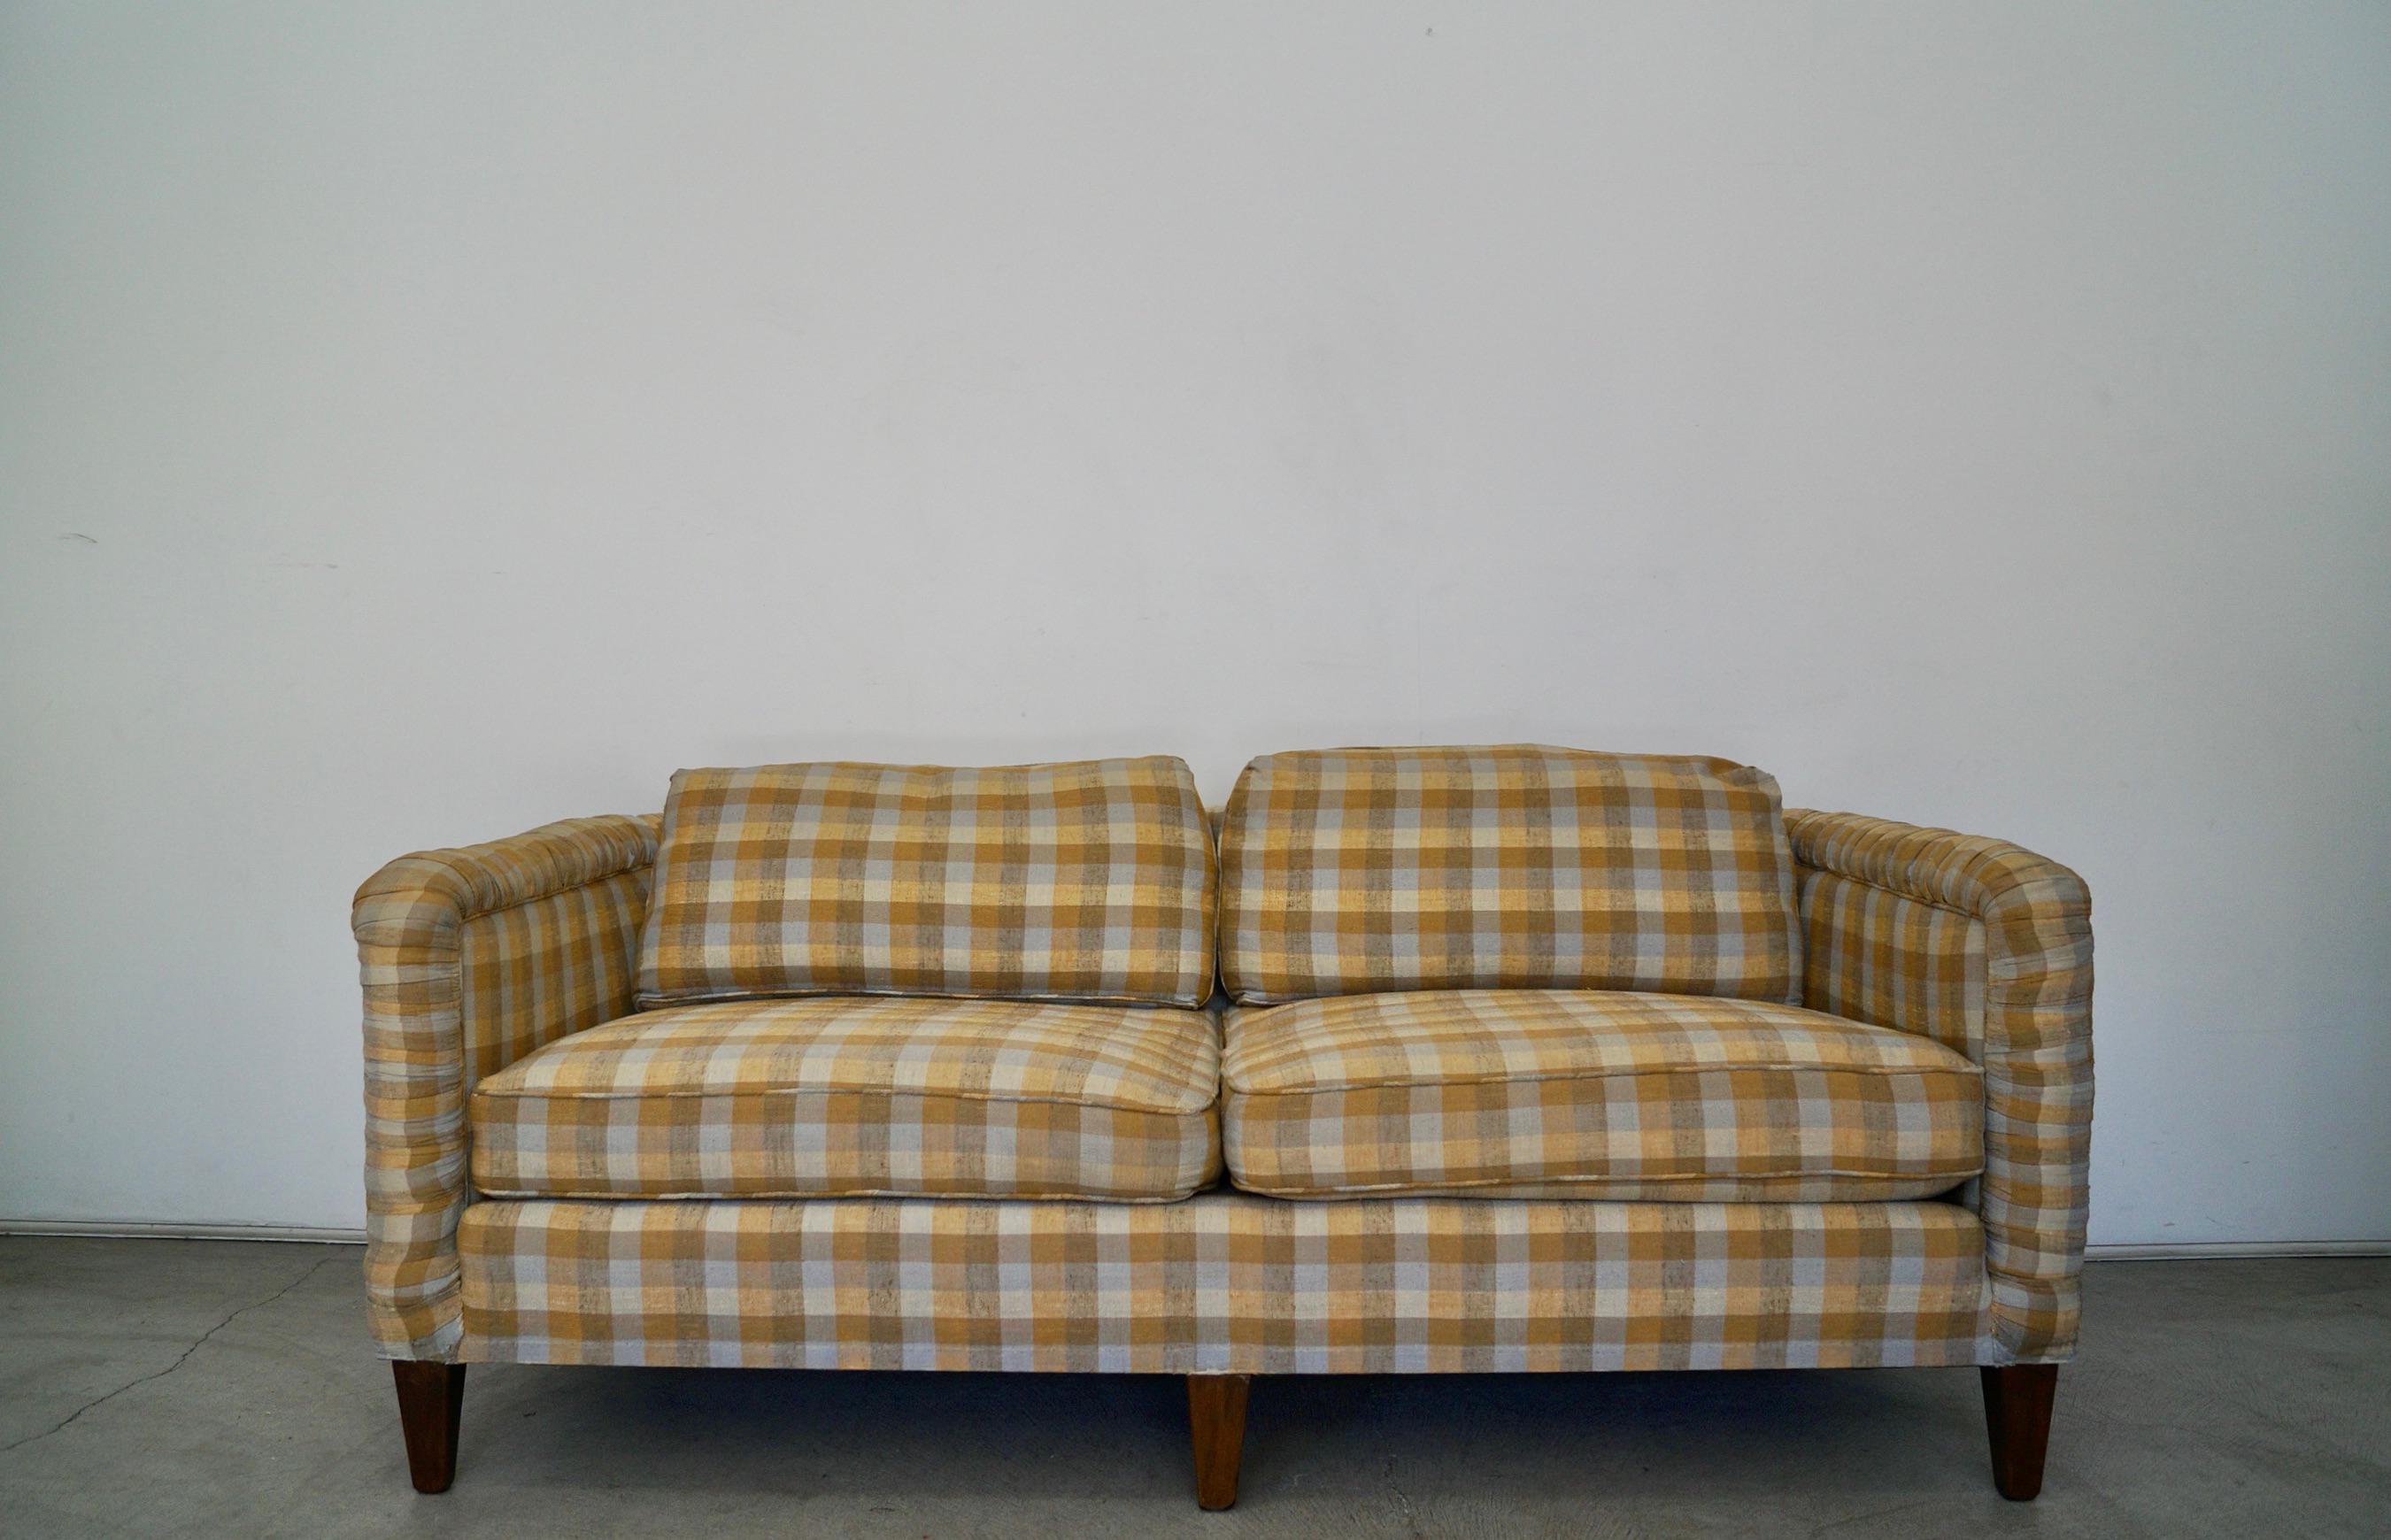 Vintage 1970s couch for sale. Manufactured by Beverly Interiors in California in 1975, and still retains the original tag. The quality and craftsmanship of the frame is outstanding. It has coil springs on the seat with down filled feather seat and